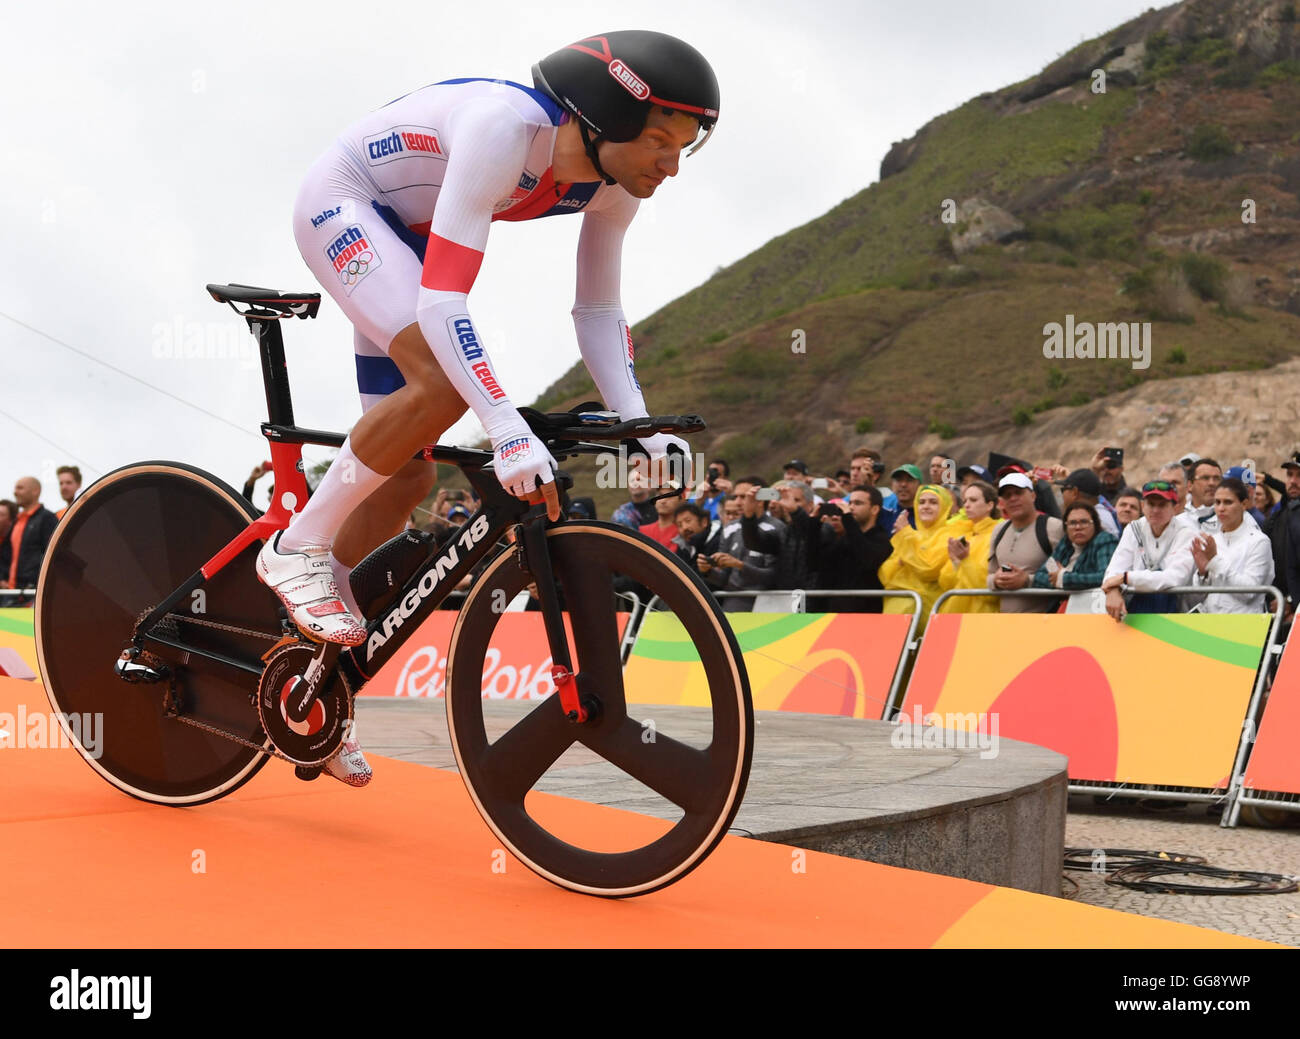 Rio de Janeiro, Brazil. 10th Aug, 2016. Jan Barta of Czech Republic at the start of the men's Individual Time Trial of the Rio 2016 Olympic Games Road Cycling events at Pontal in Rio de Janeiro, Brazil, 10 August 2016. Photo: Sebastian Kahnert/dpa/Alamy Live News Stock Photo